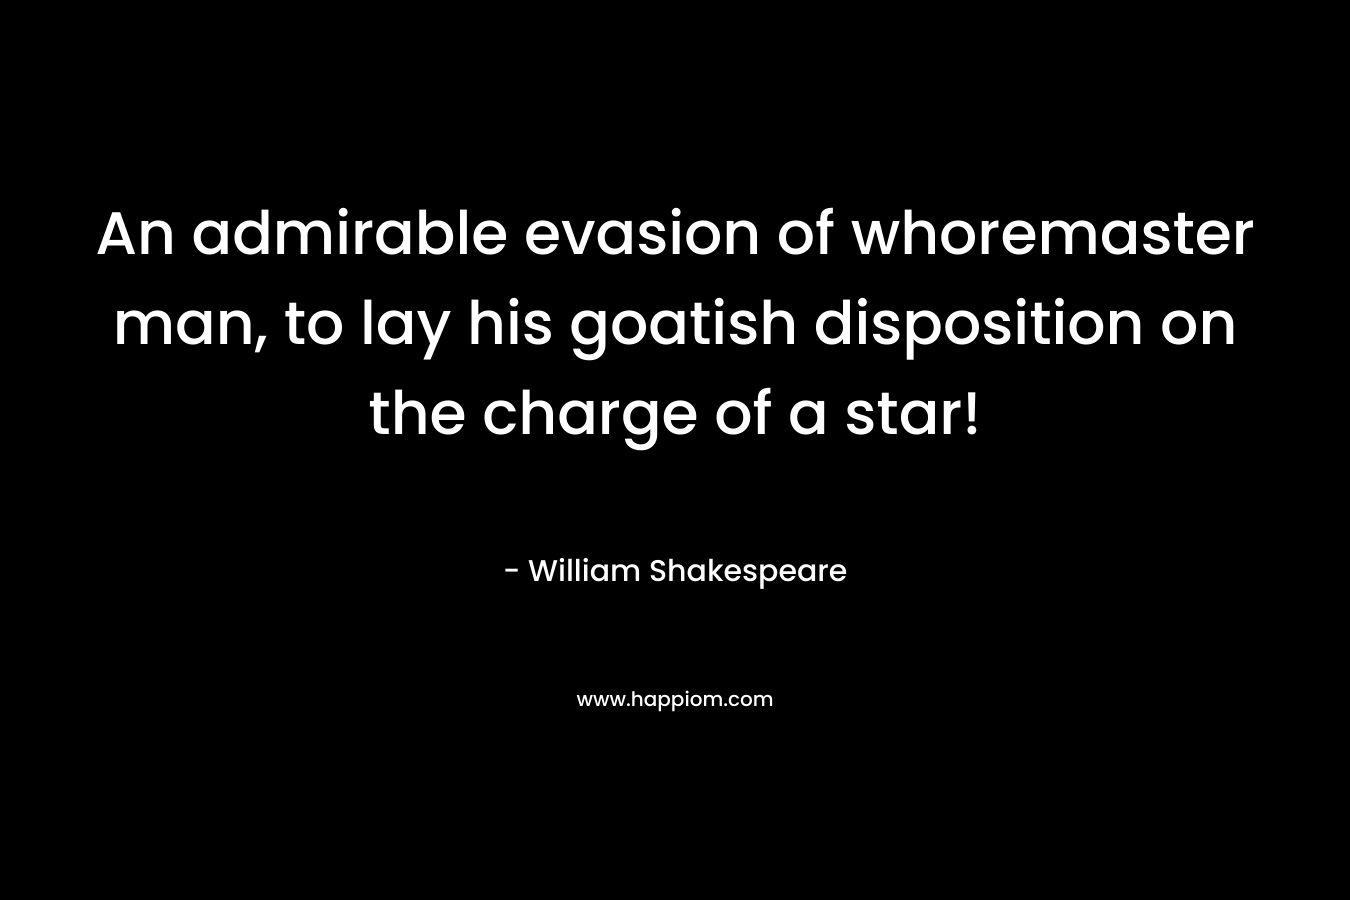 An admirable evasion of whoremaster man, to lay his goatish disposition on the charge of a star!